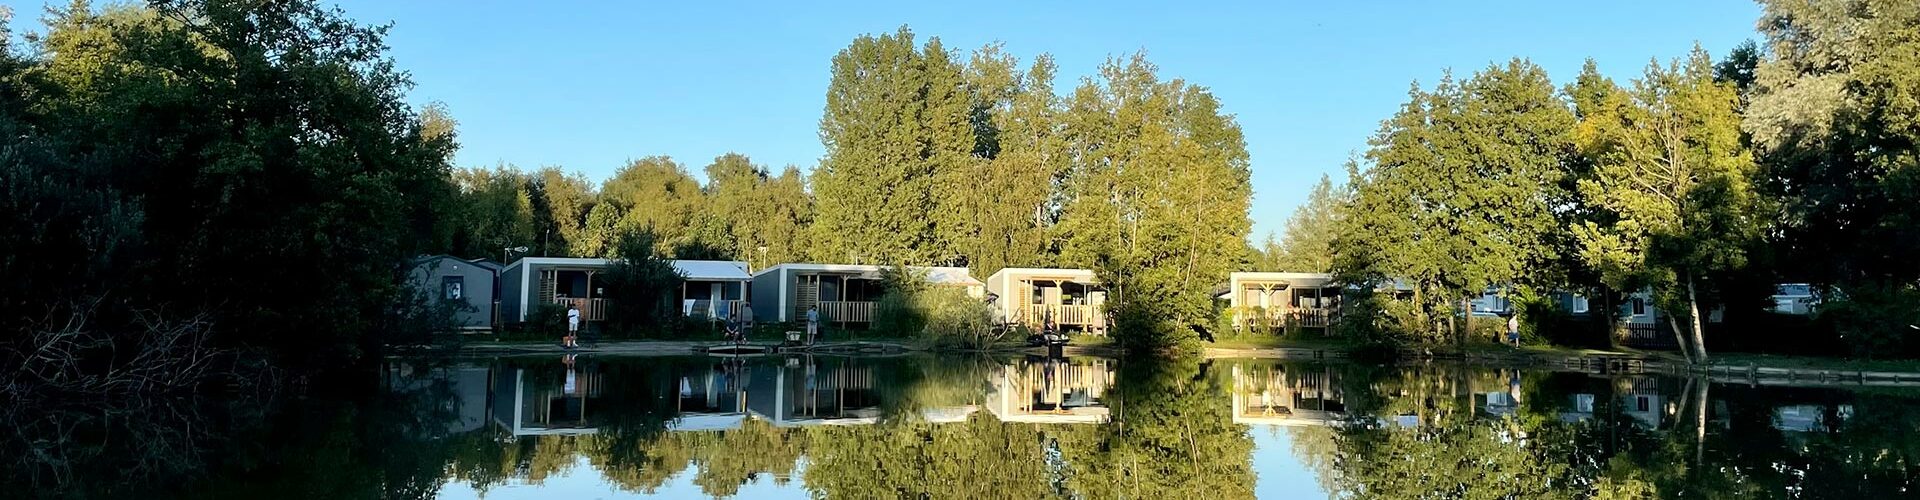 http://Located%20on%20the%20Opal%20Coast,%20“Les%20Tourterelles”%20is%20an%20outdoor%20hotel,%20camping%20and%20caravanning%20with%20swimming%20pools%20located%20in%20Rang%20du%20Fliers.